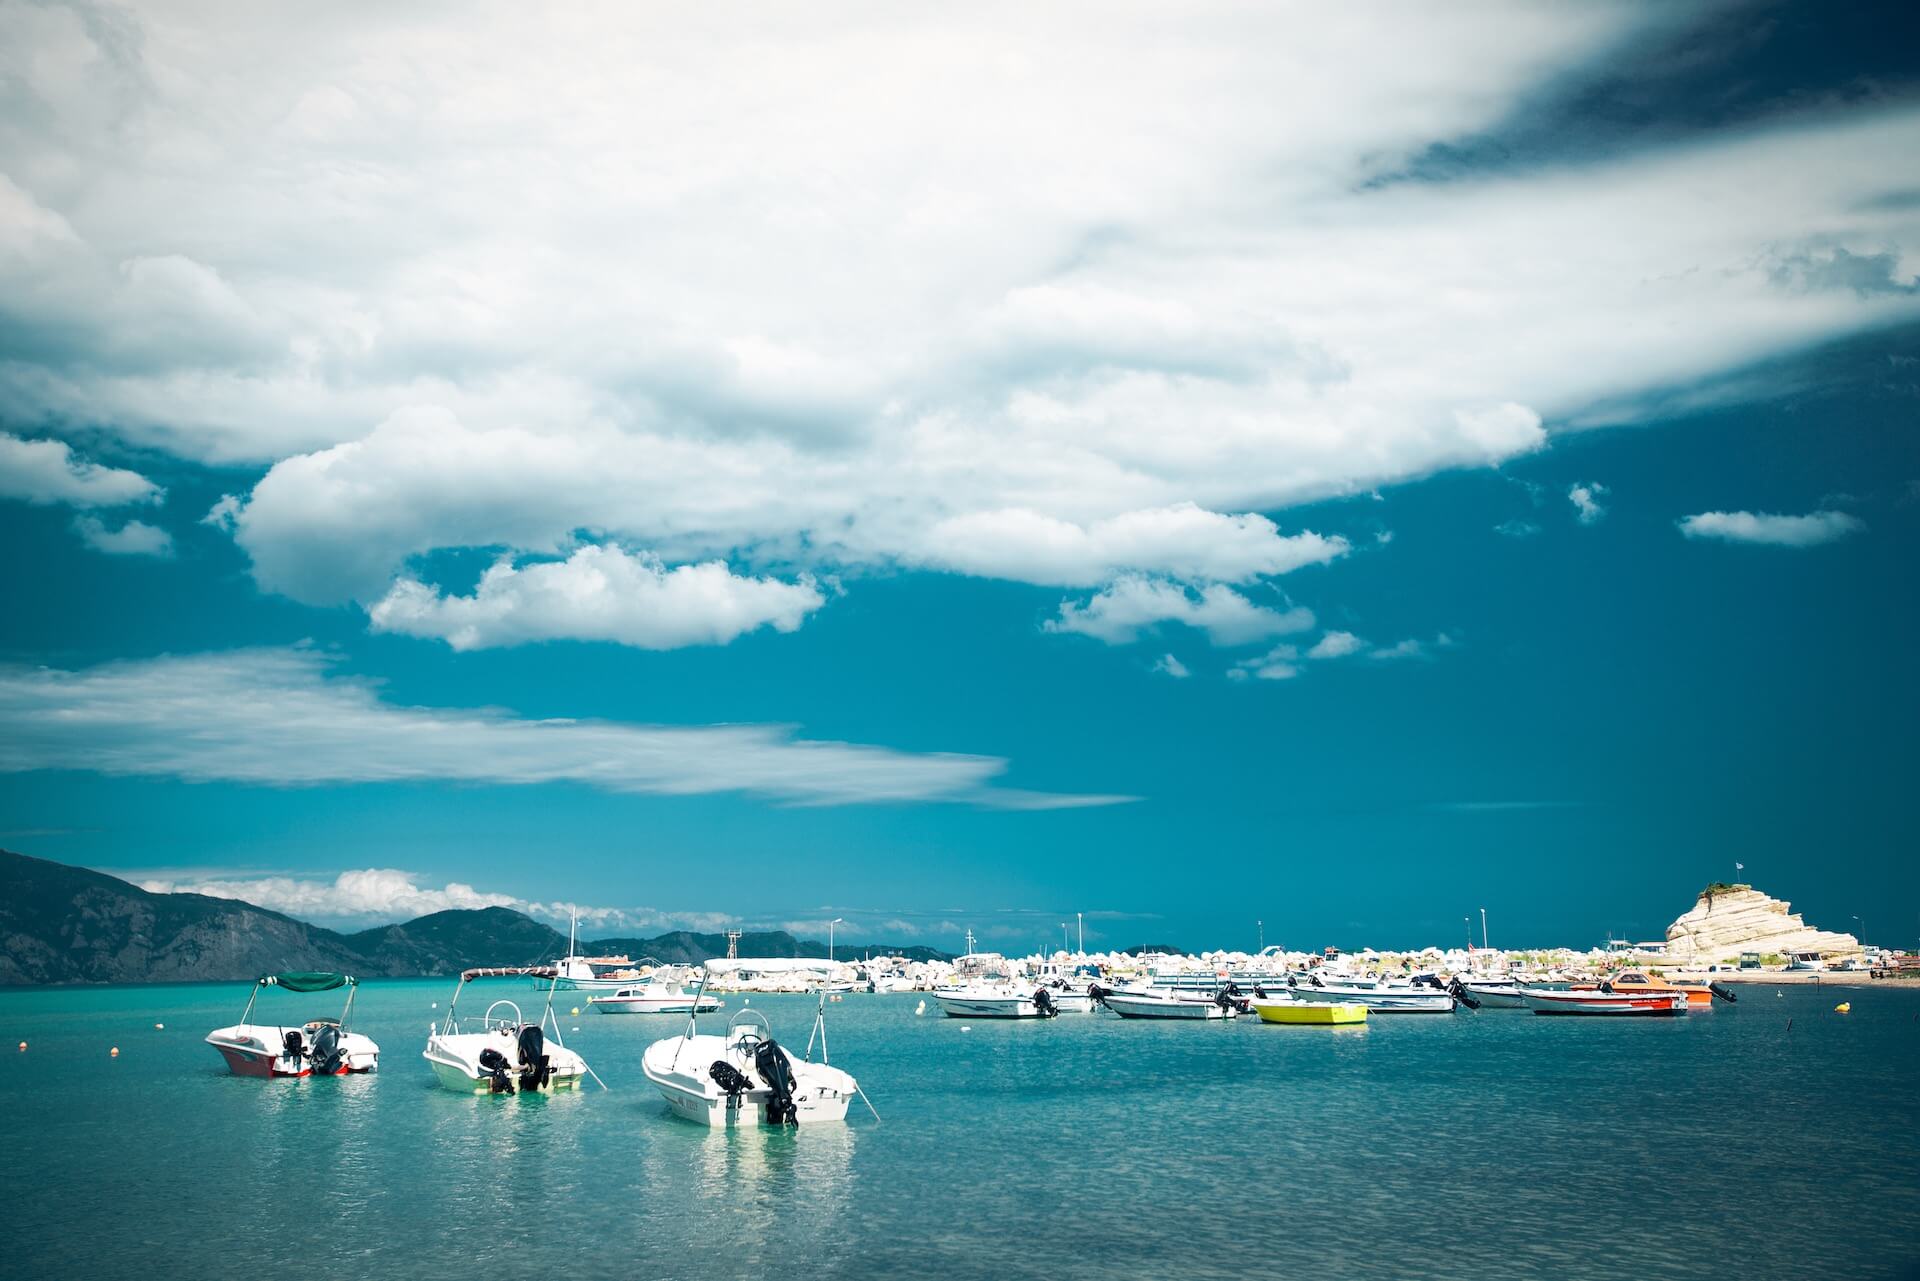 Clouds above the sea filled with boats